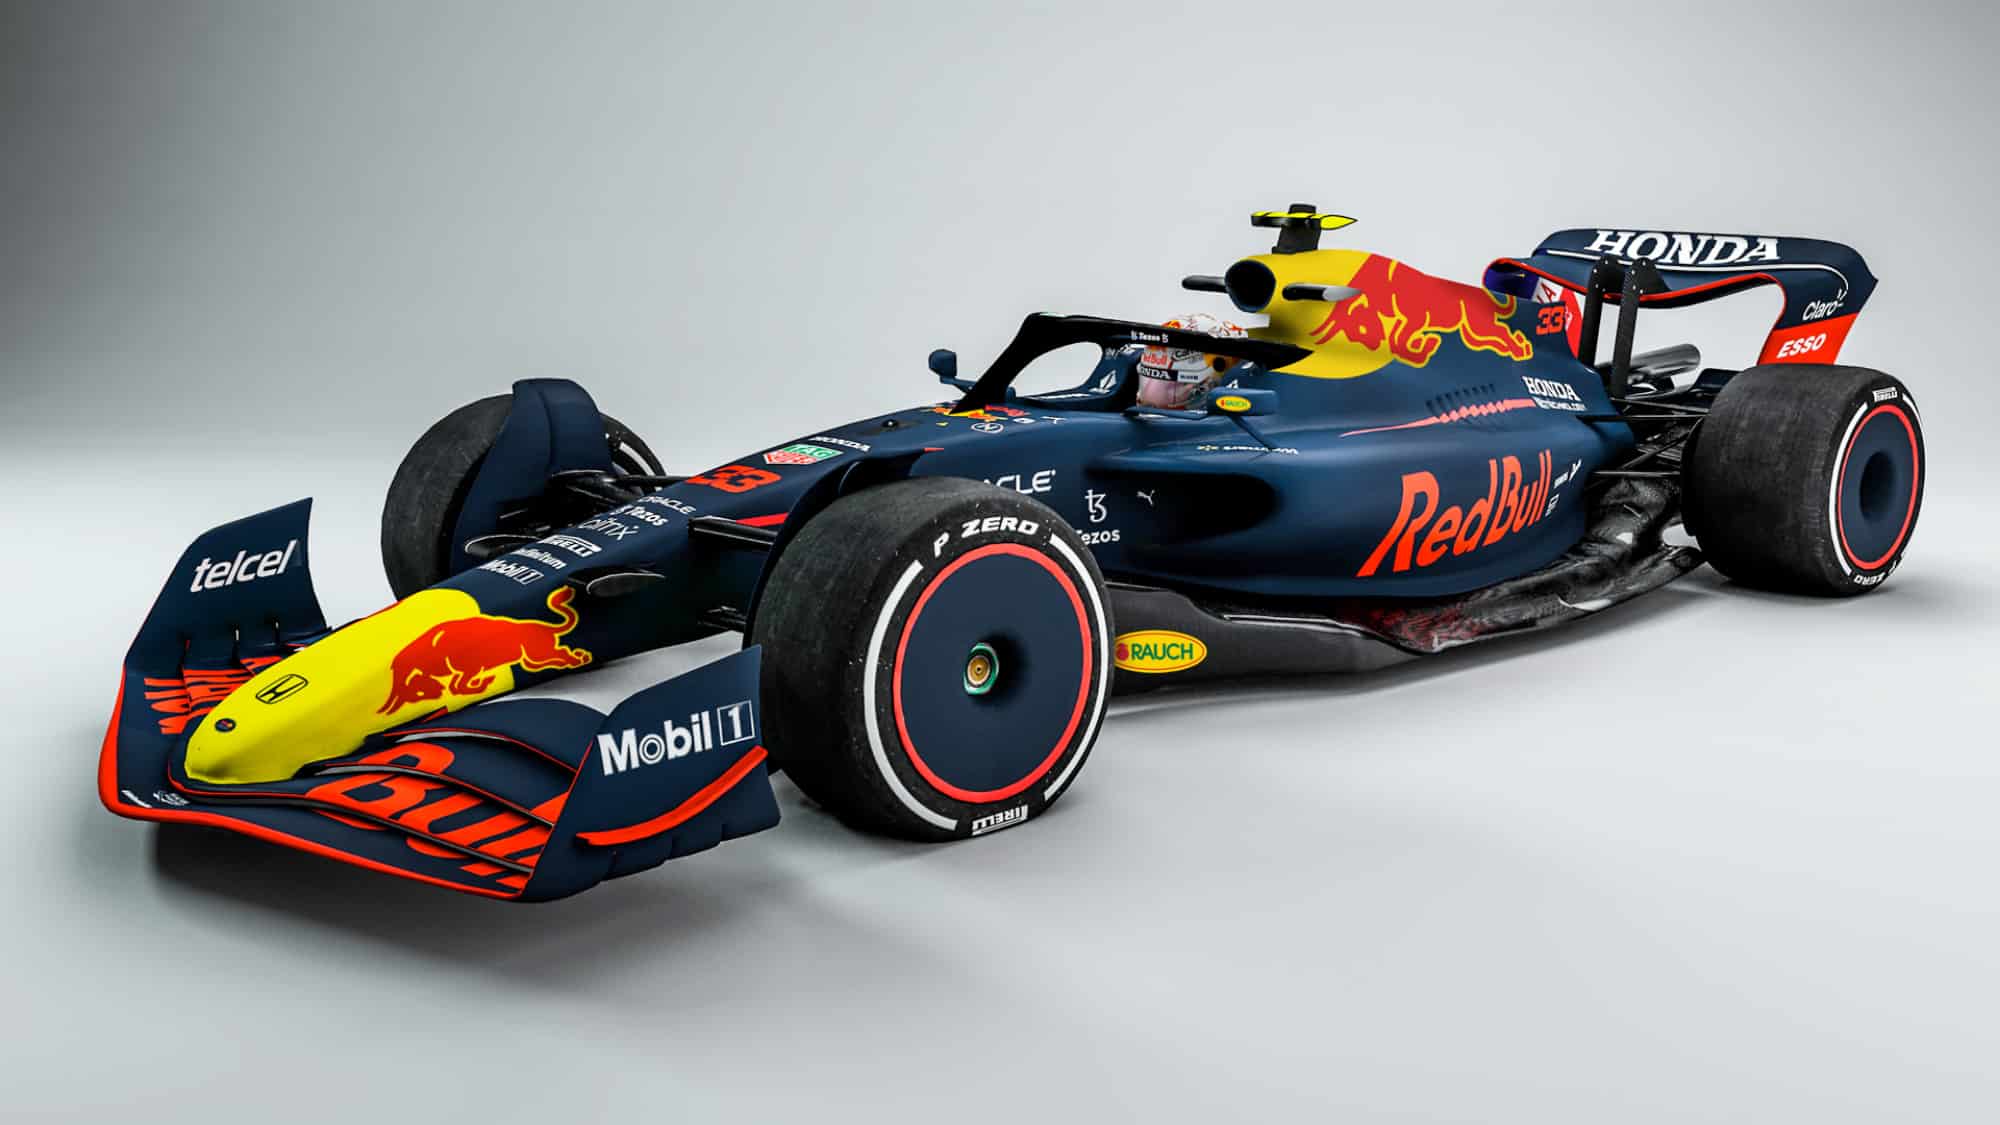 the 2022 Red Bull F1 car launch live - Motor Magazine